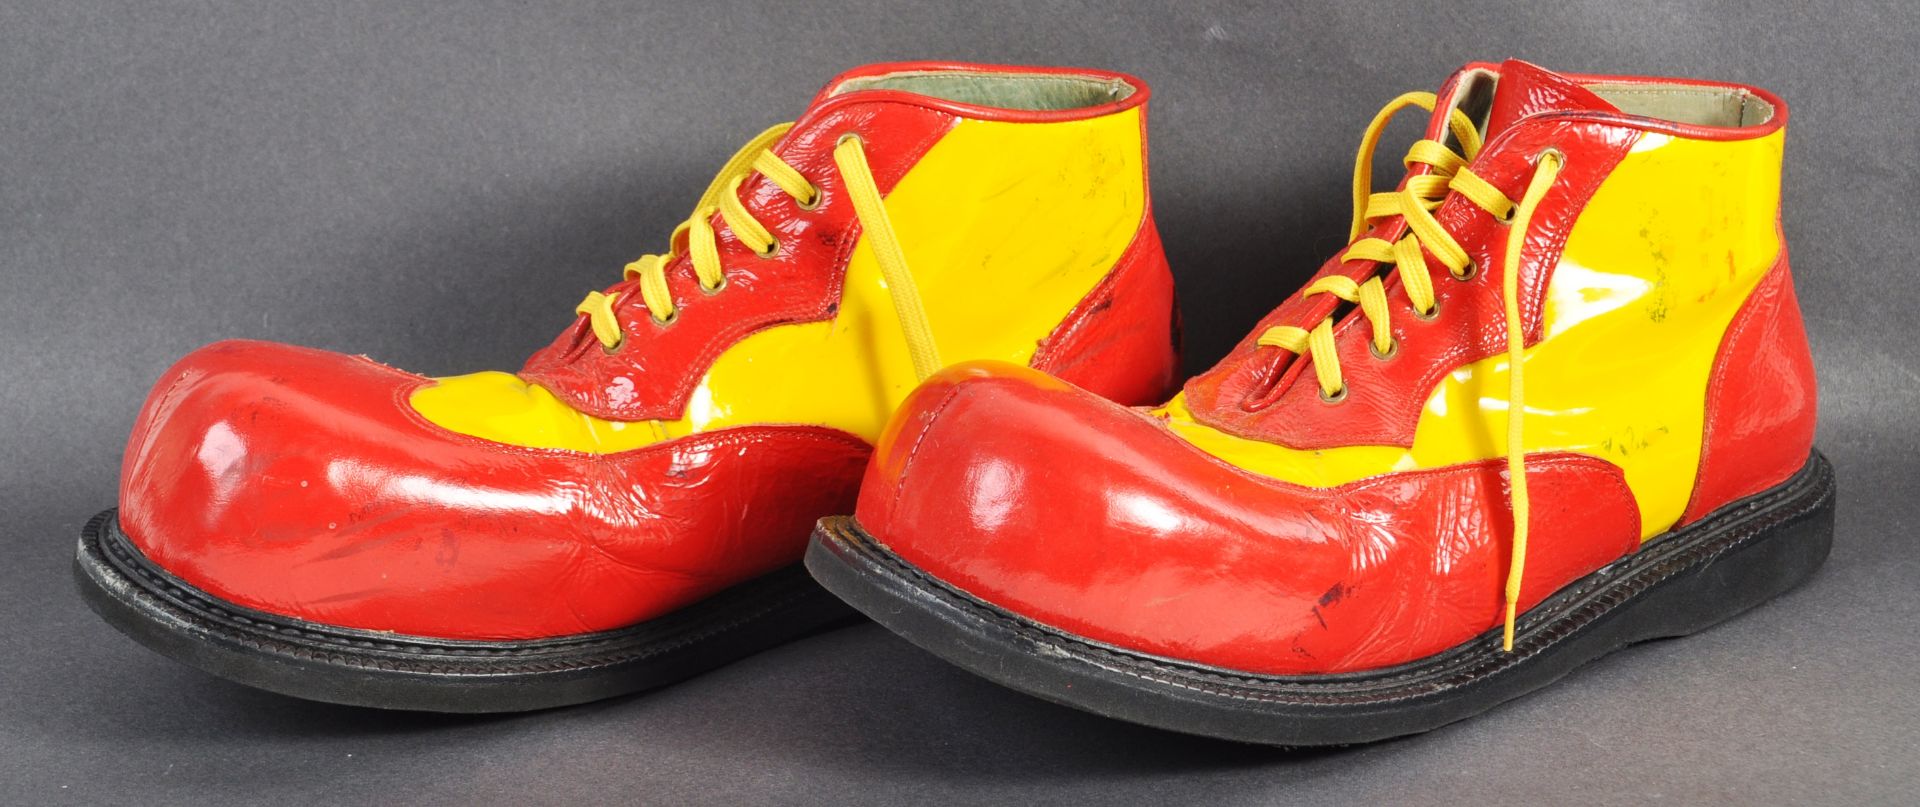 PAIR OF VINTAGE RED & YELLOW CLOWN SHOES